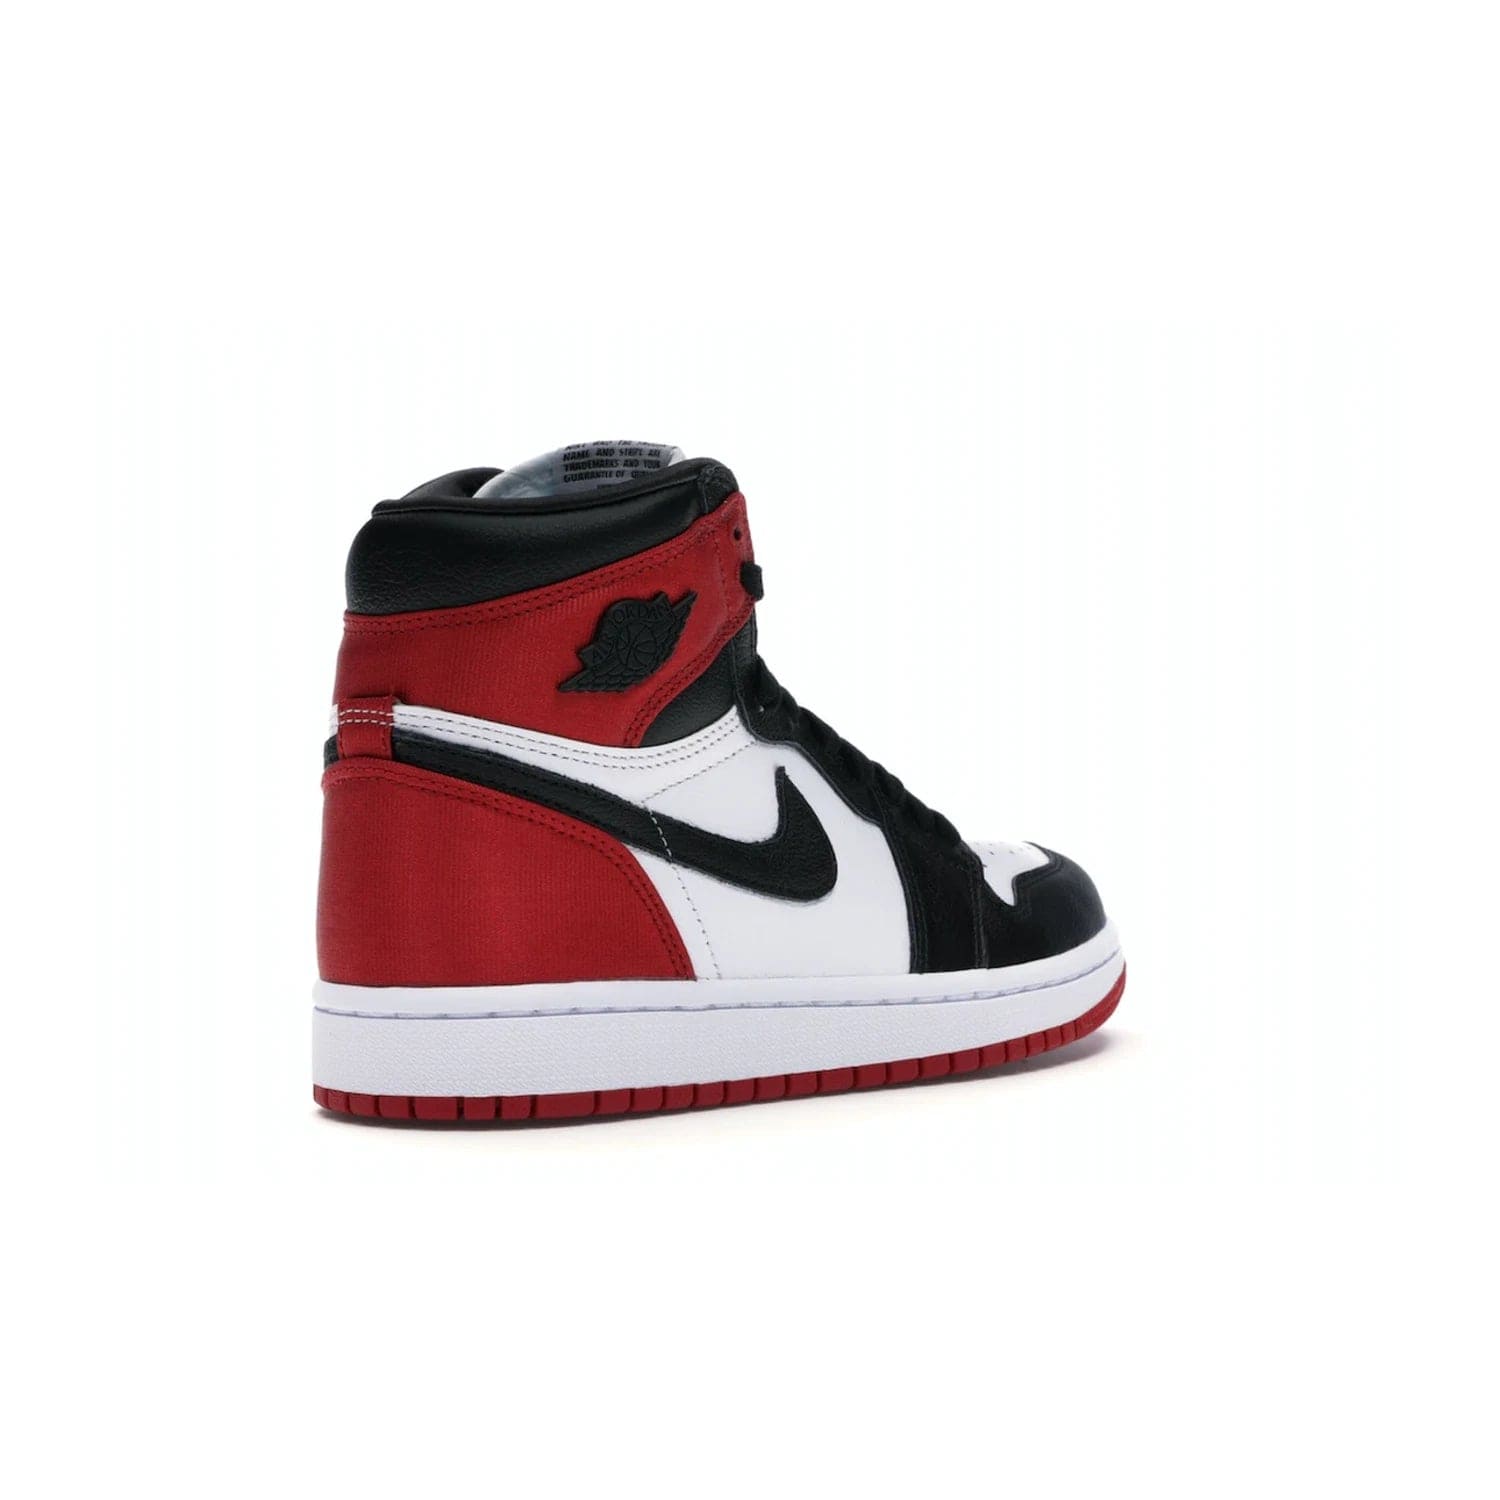 Jordan 1 Retro High Satin Black Toe (Women's) - Image 32 - Only at www.BallersClubKickz.com - Luxurious take on the timeless Air Jordan 1. Features a mix of black leather and satin materials with subtle University Red accents. Elevated look with metal Wings logo on the heel. Released in August 2019.